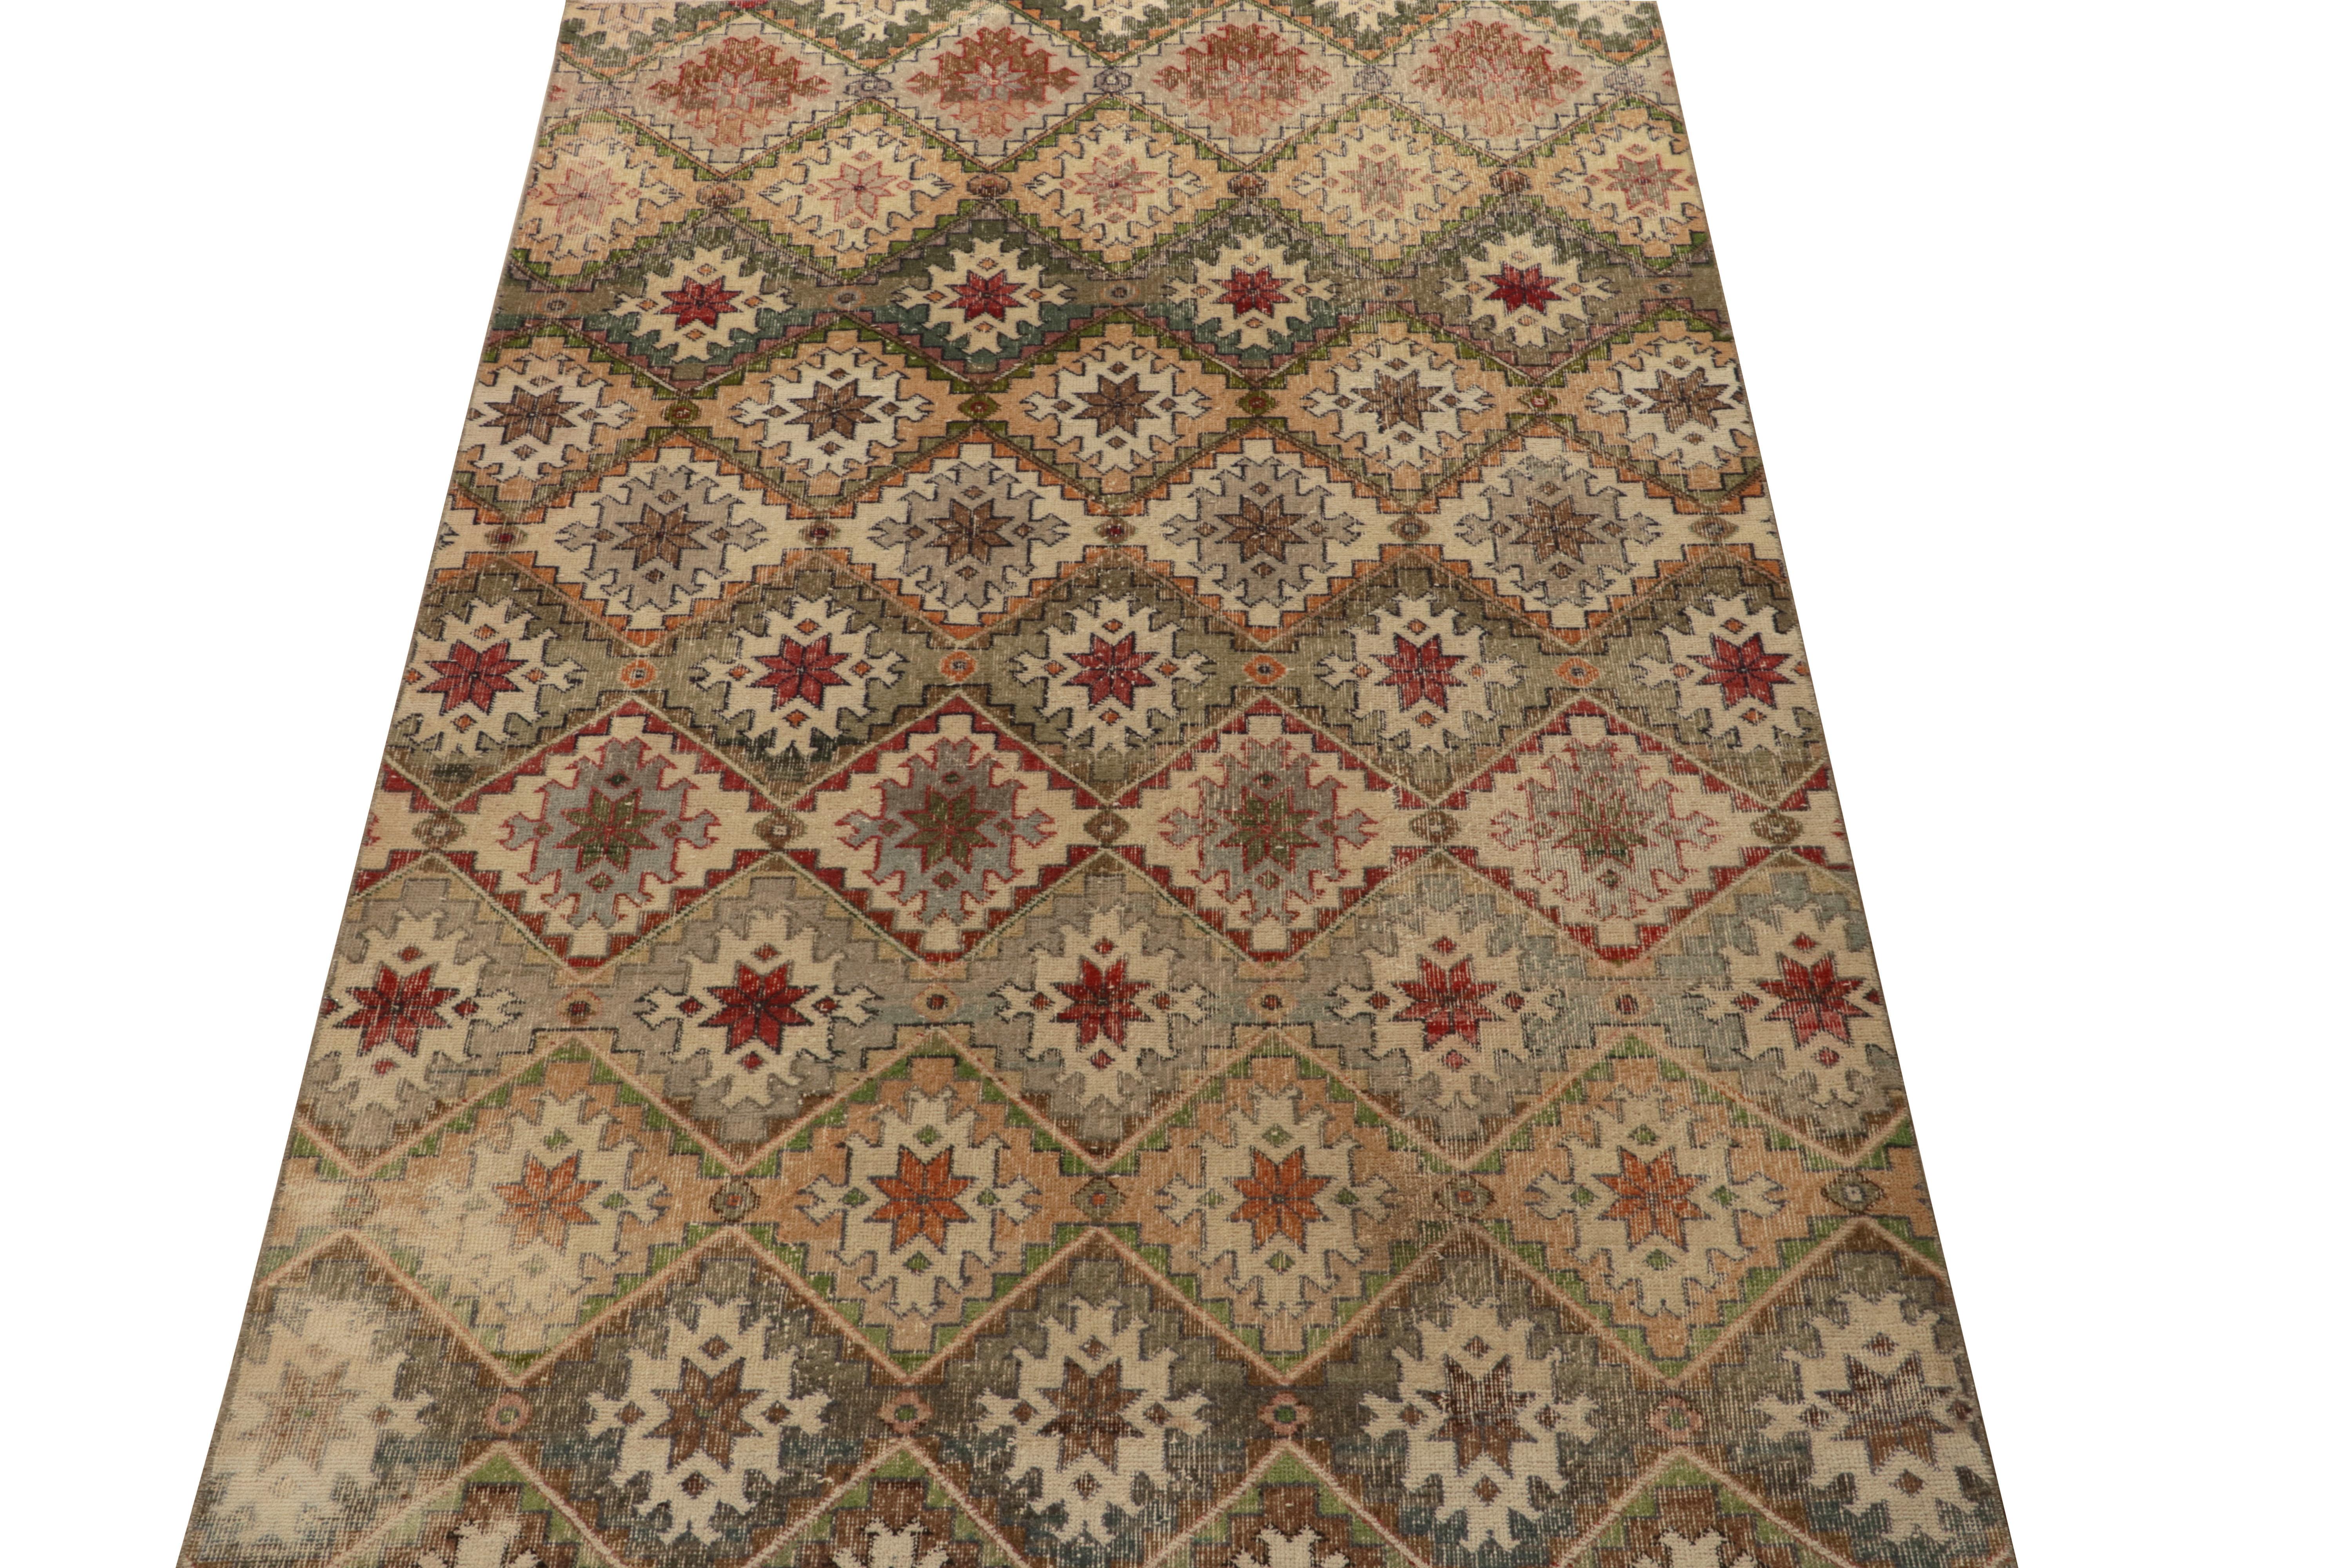 Tribal 1960s Vintage Distressed Rug in Beige-Brown with Colorful Pattern by Rug & Kilim For Sale